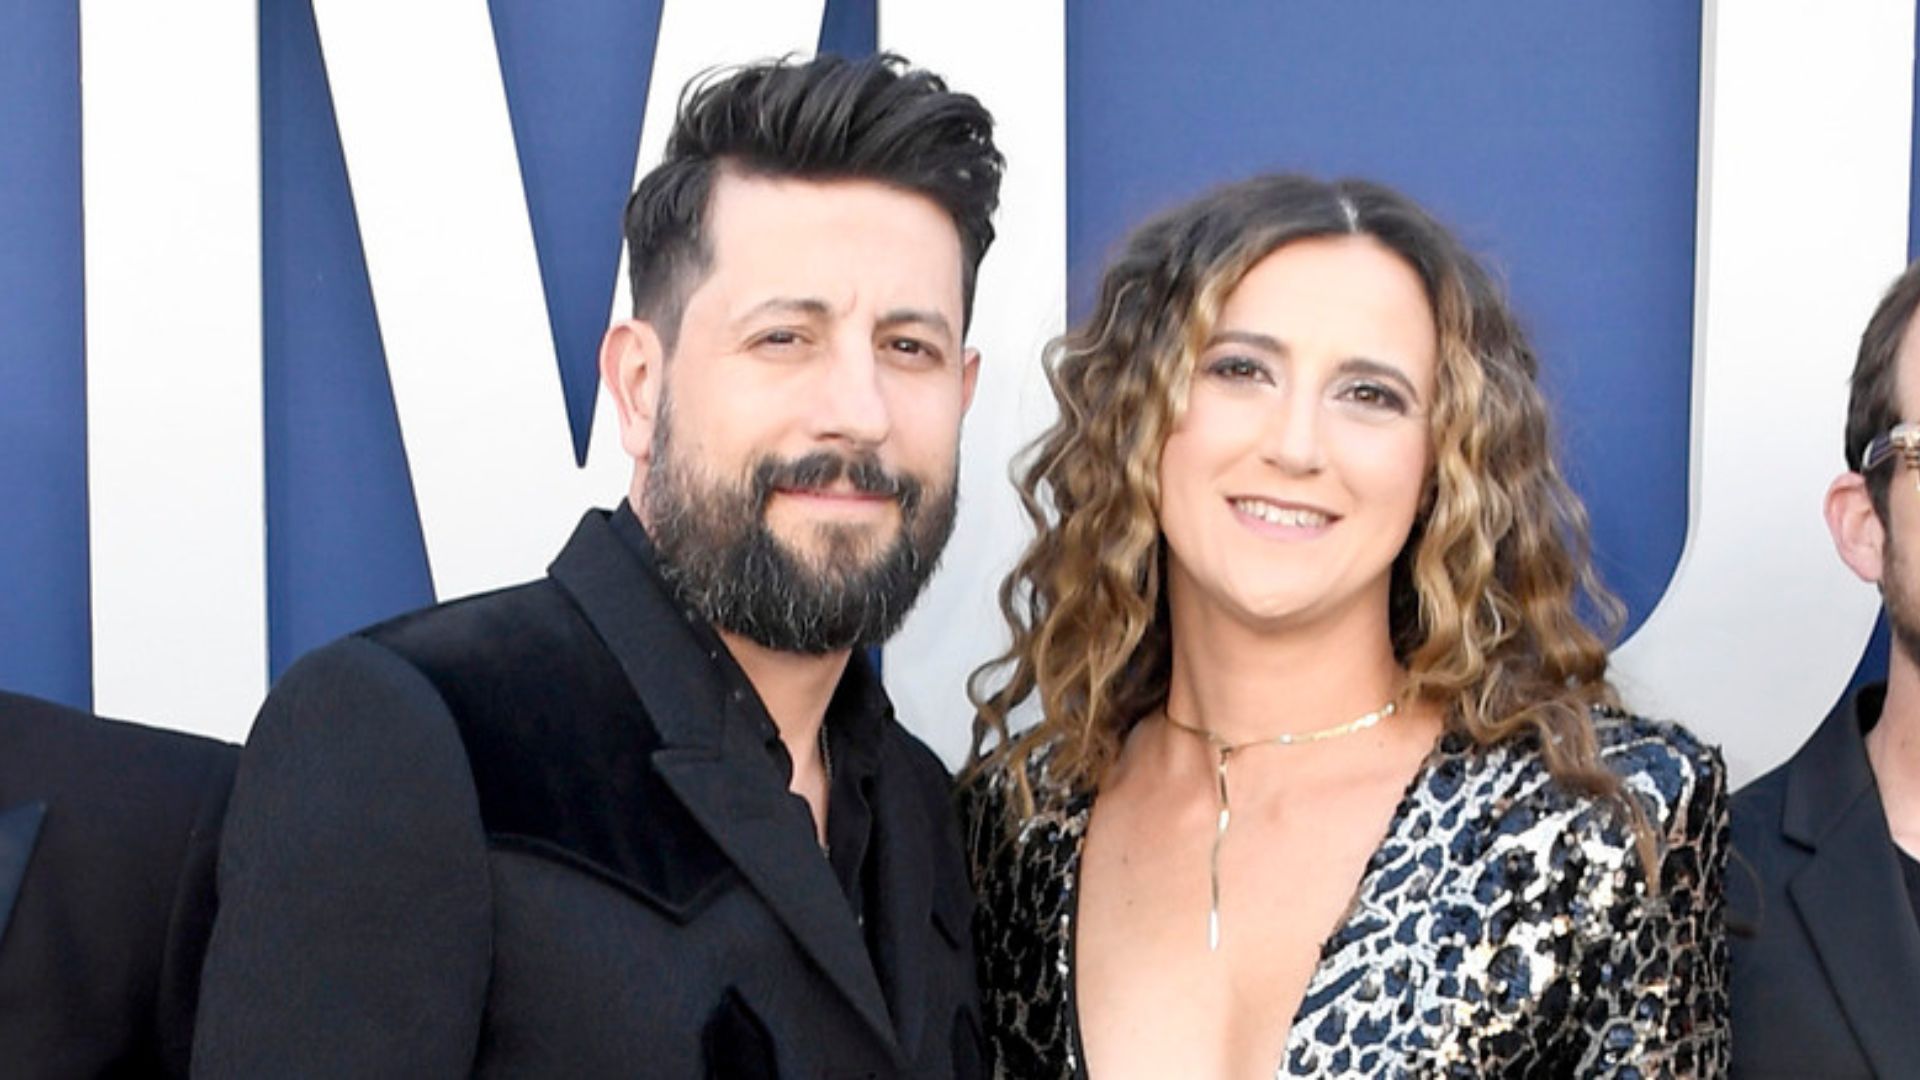 About Matthew Ramsey's Wife And Old Dominion's CMA Awards Journey